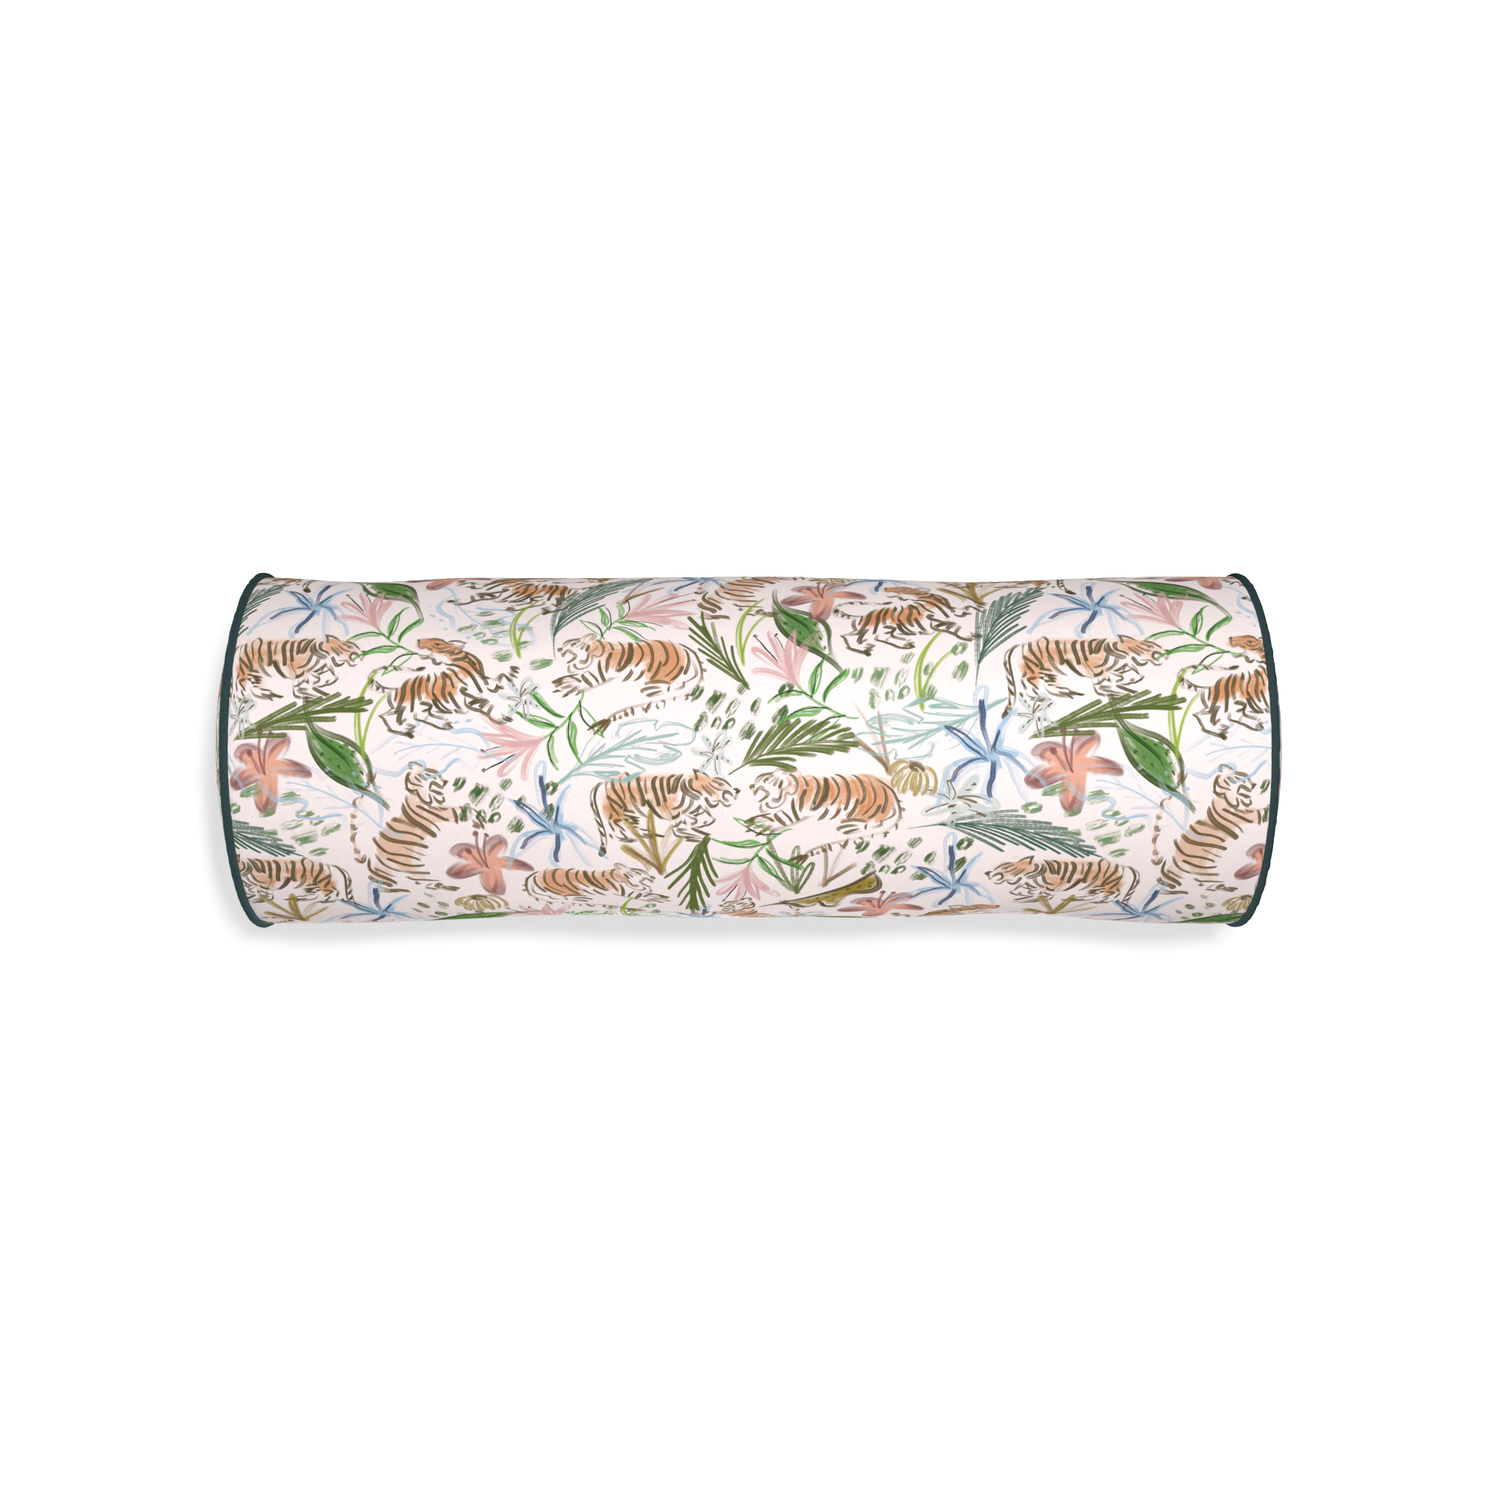 Bolster frida pink custom pink chinoiserie tigerpillow with p piping on white background